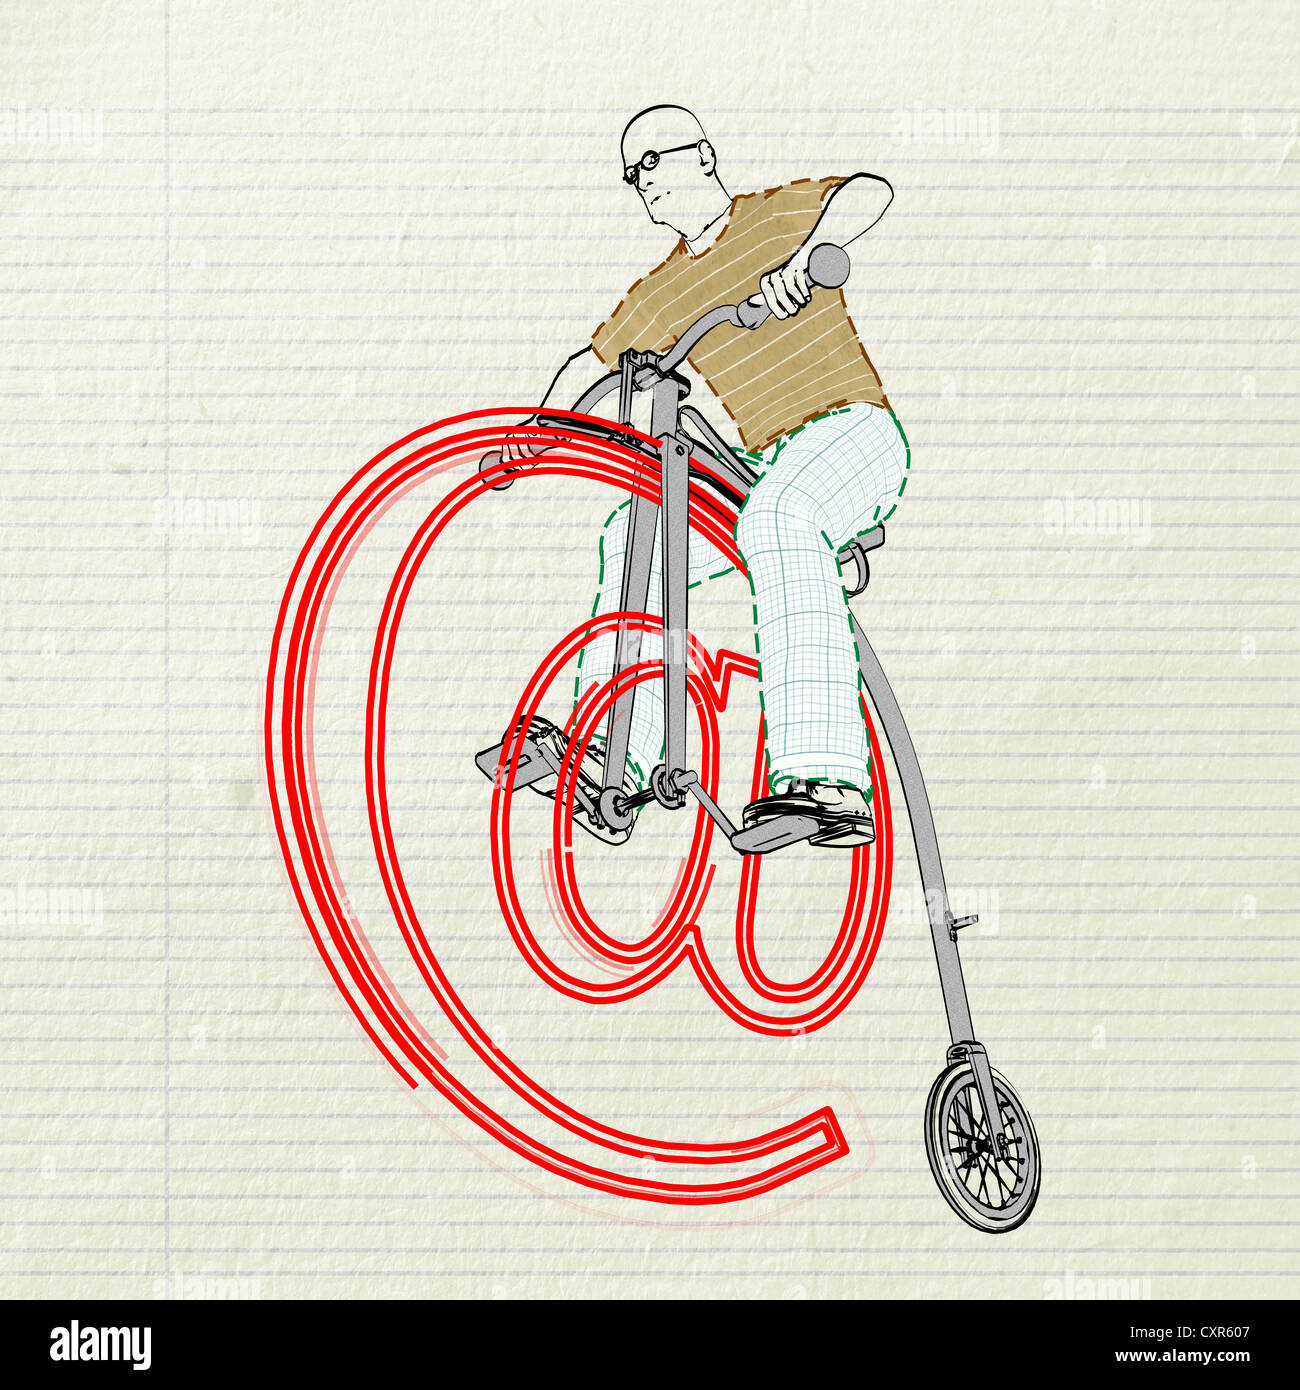 Old man riding a penny farthing bicycle consisting of an at sign, senior surfing the web, illustration Stock Photo